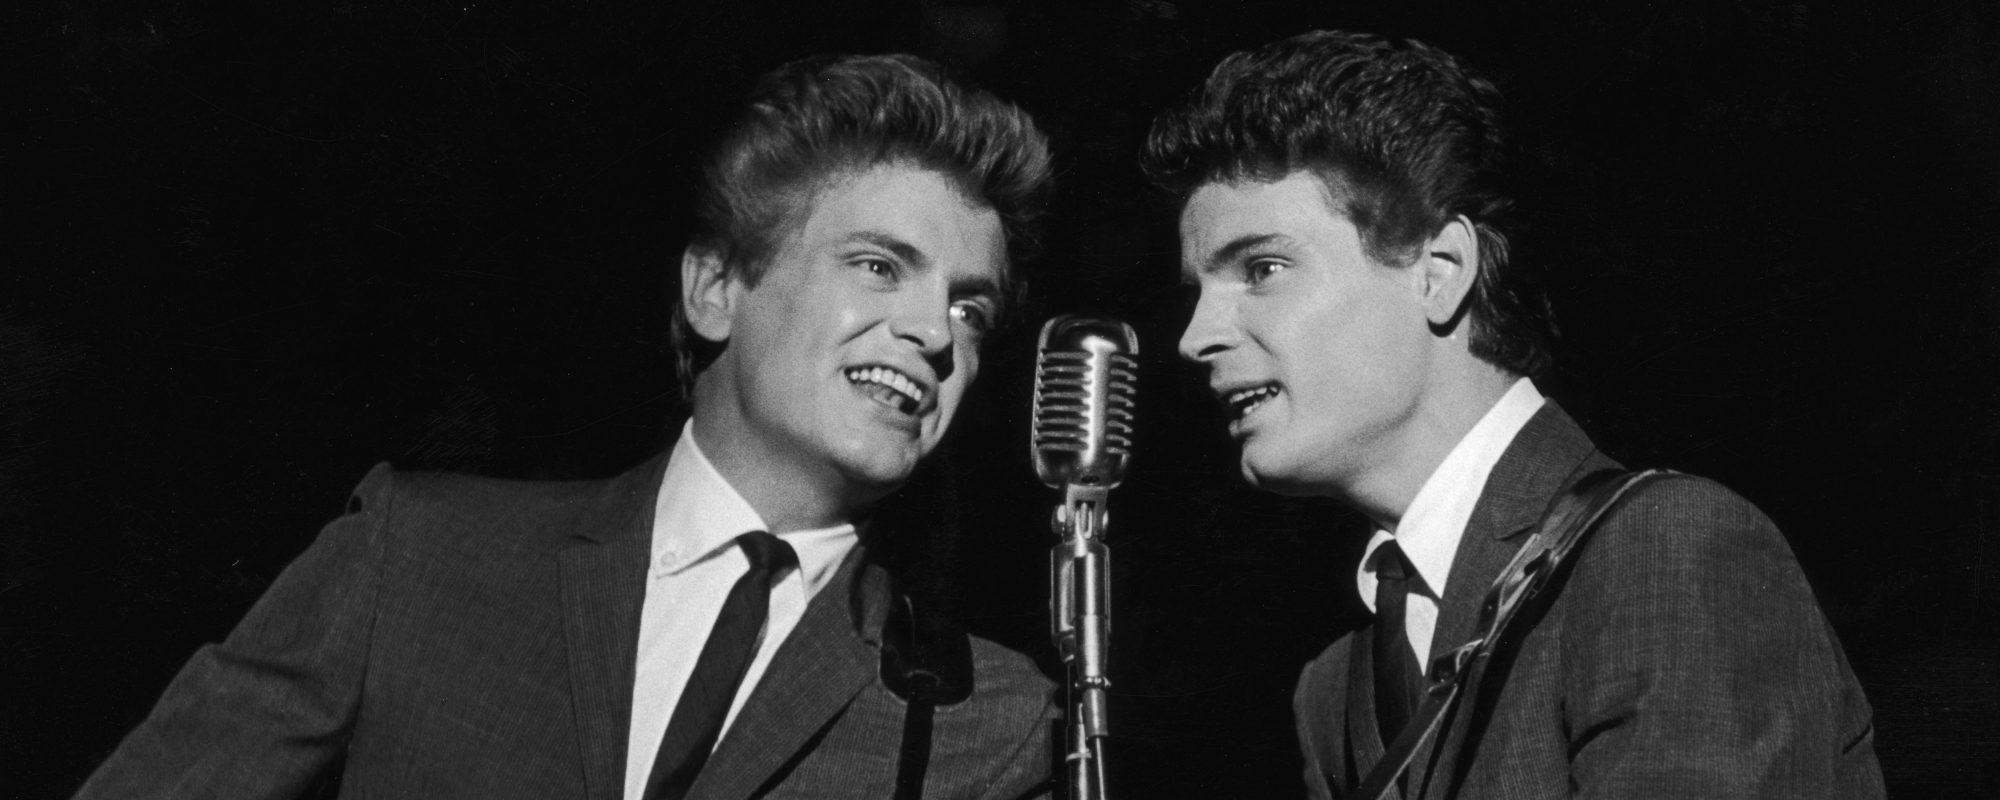 5 Fascinating Facts About The Everly Brothers and Why One of Their Big Hits Was Banned in Boston